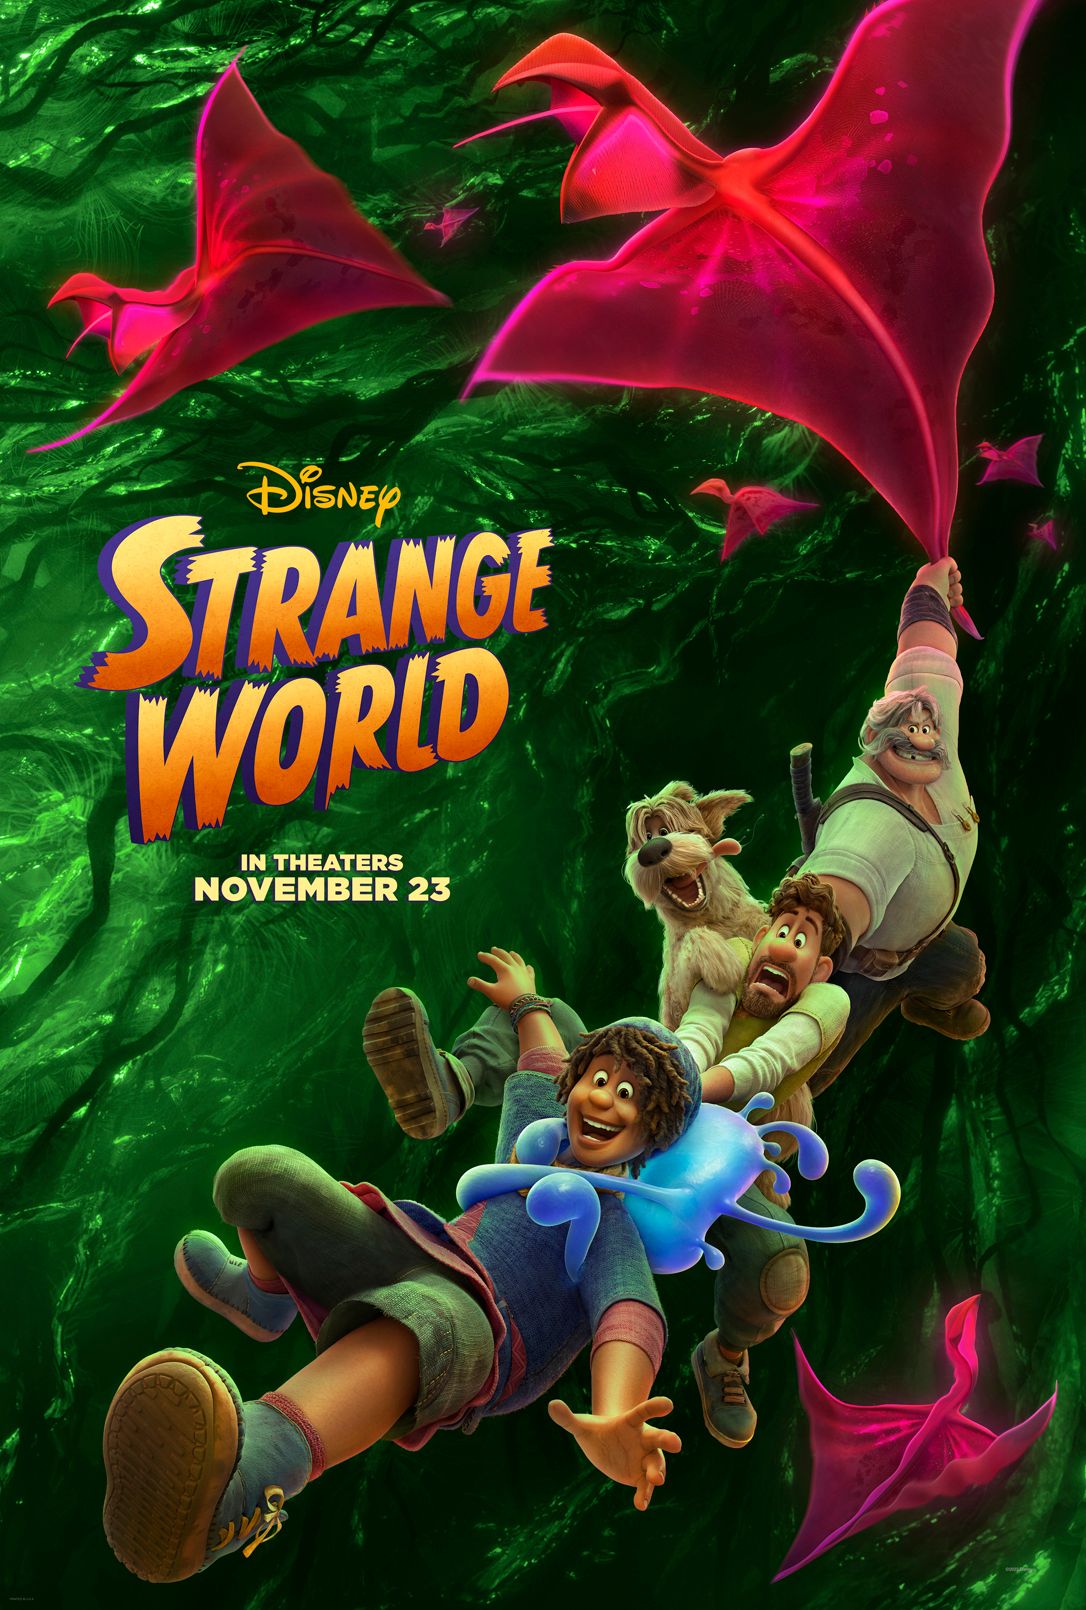 disney-releases-trailer-for-new-animated-movie-strange-world-with-jake